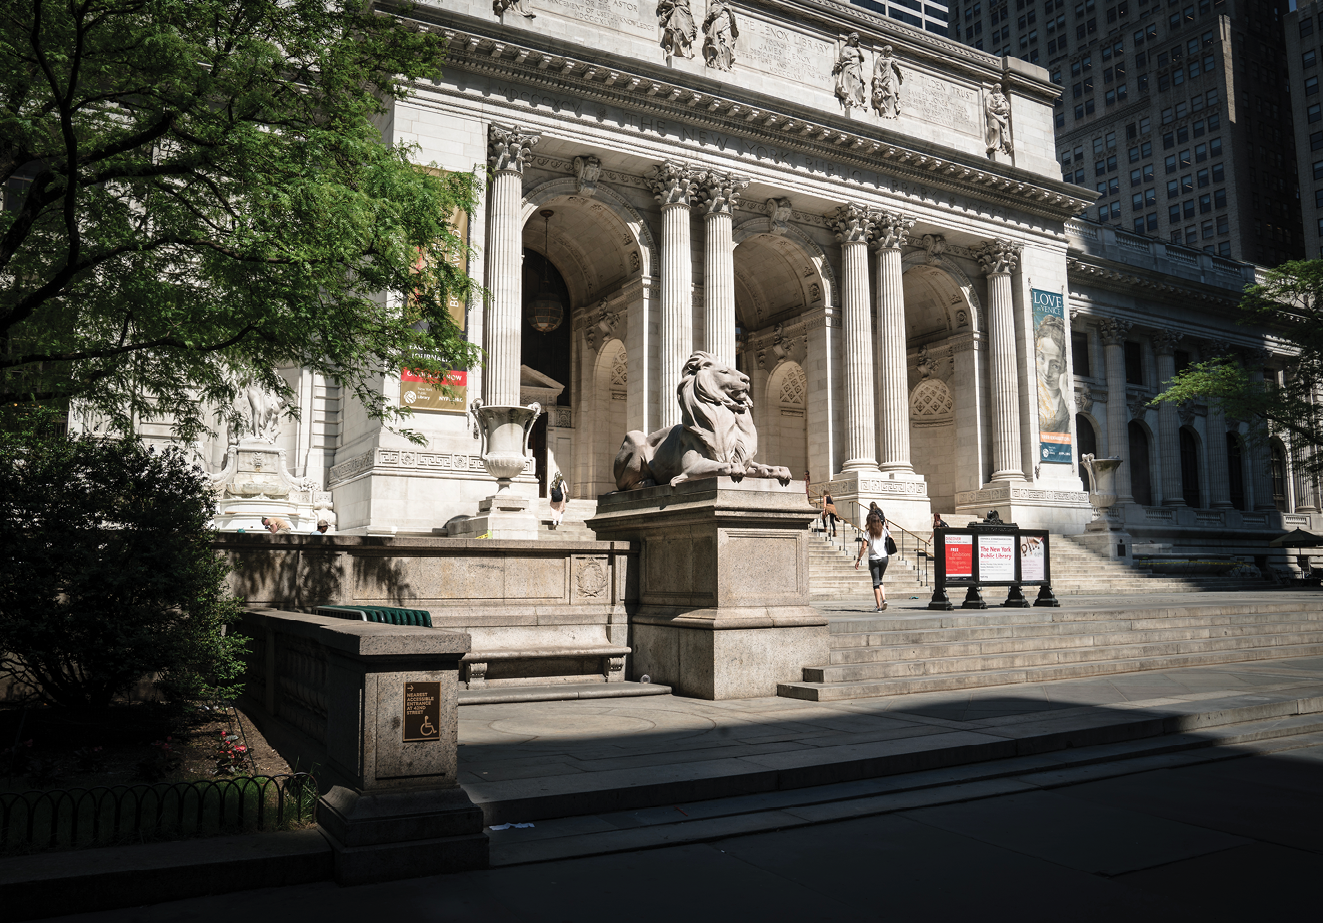 The New York Public Library on Fifth Avenue in Midtown Manhattan